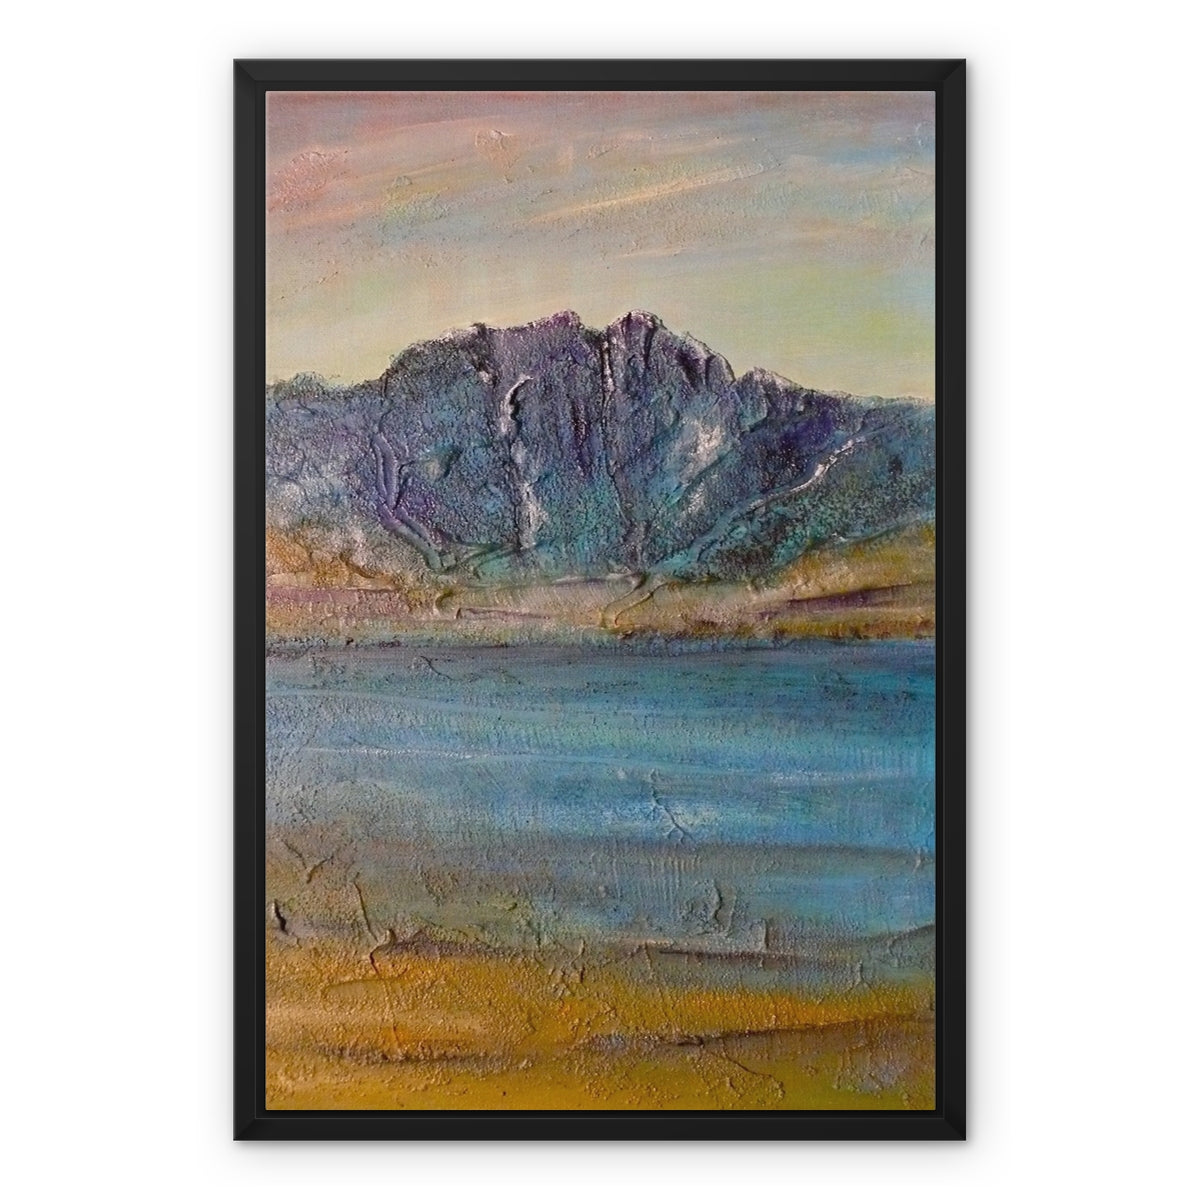 Torridon Painting | Framed Canvas From Scotland-Floating Framed Canvas Prints-Scottish Lochs & Mountains Art Gallery-18"x24"-Black Frame-Paintings, Prints, Homeware, Art Gifts From Scotland By Scottish Artist Kevin Hunter